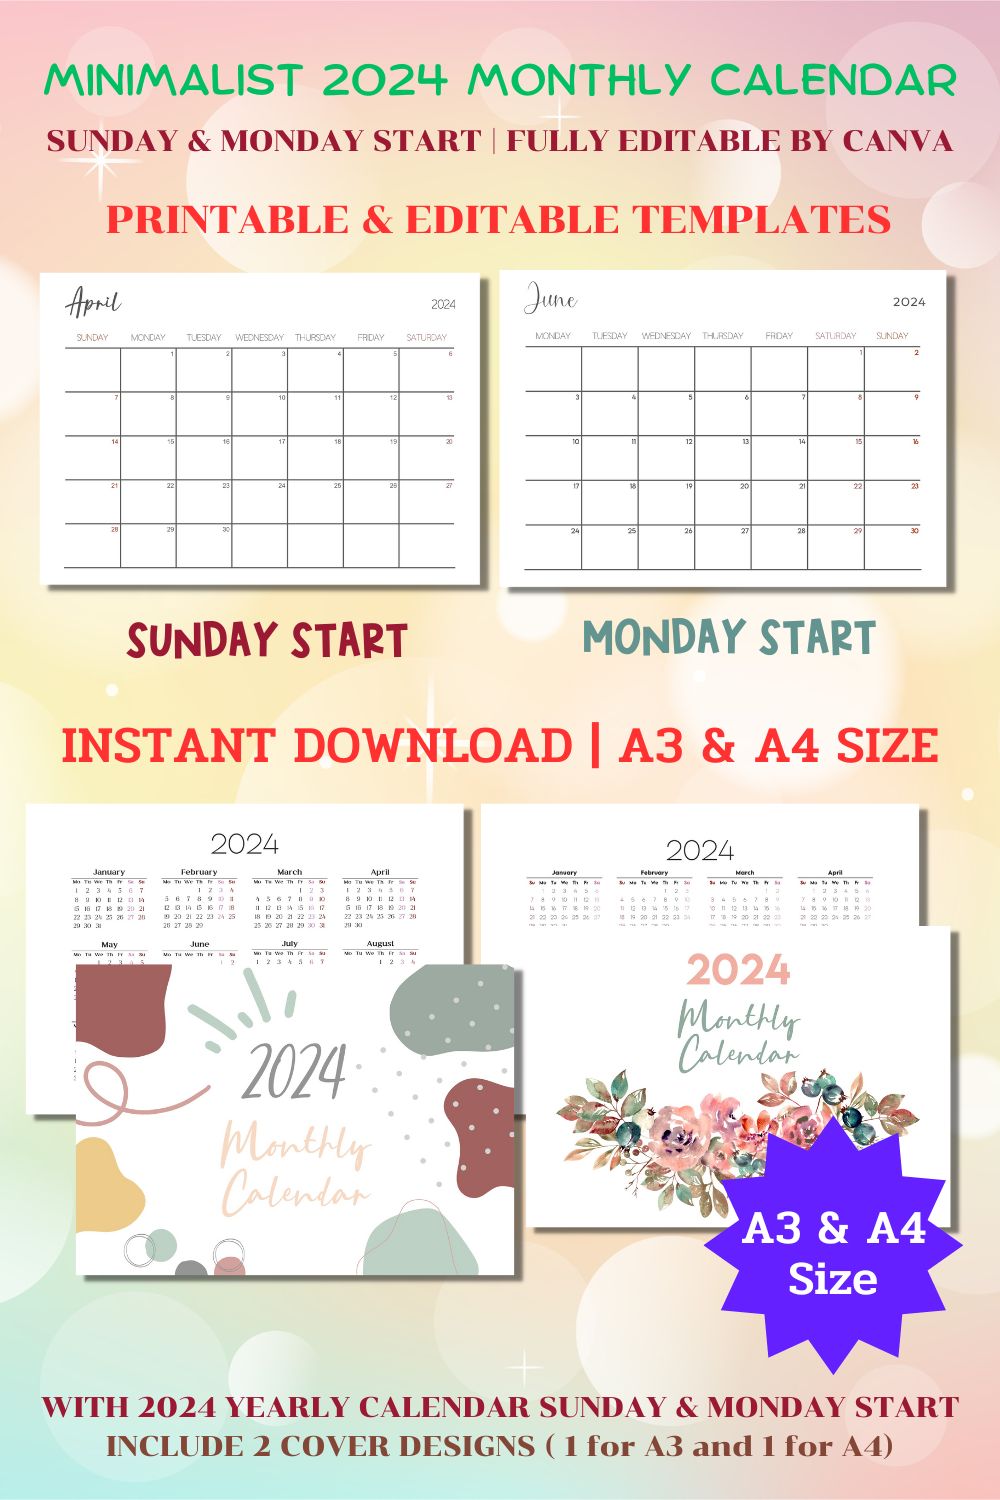 2024 Minimal Monthly Calendar Editable & Printable A3 & A4 pinterest preview image.